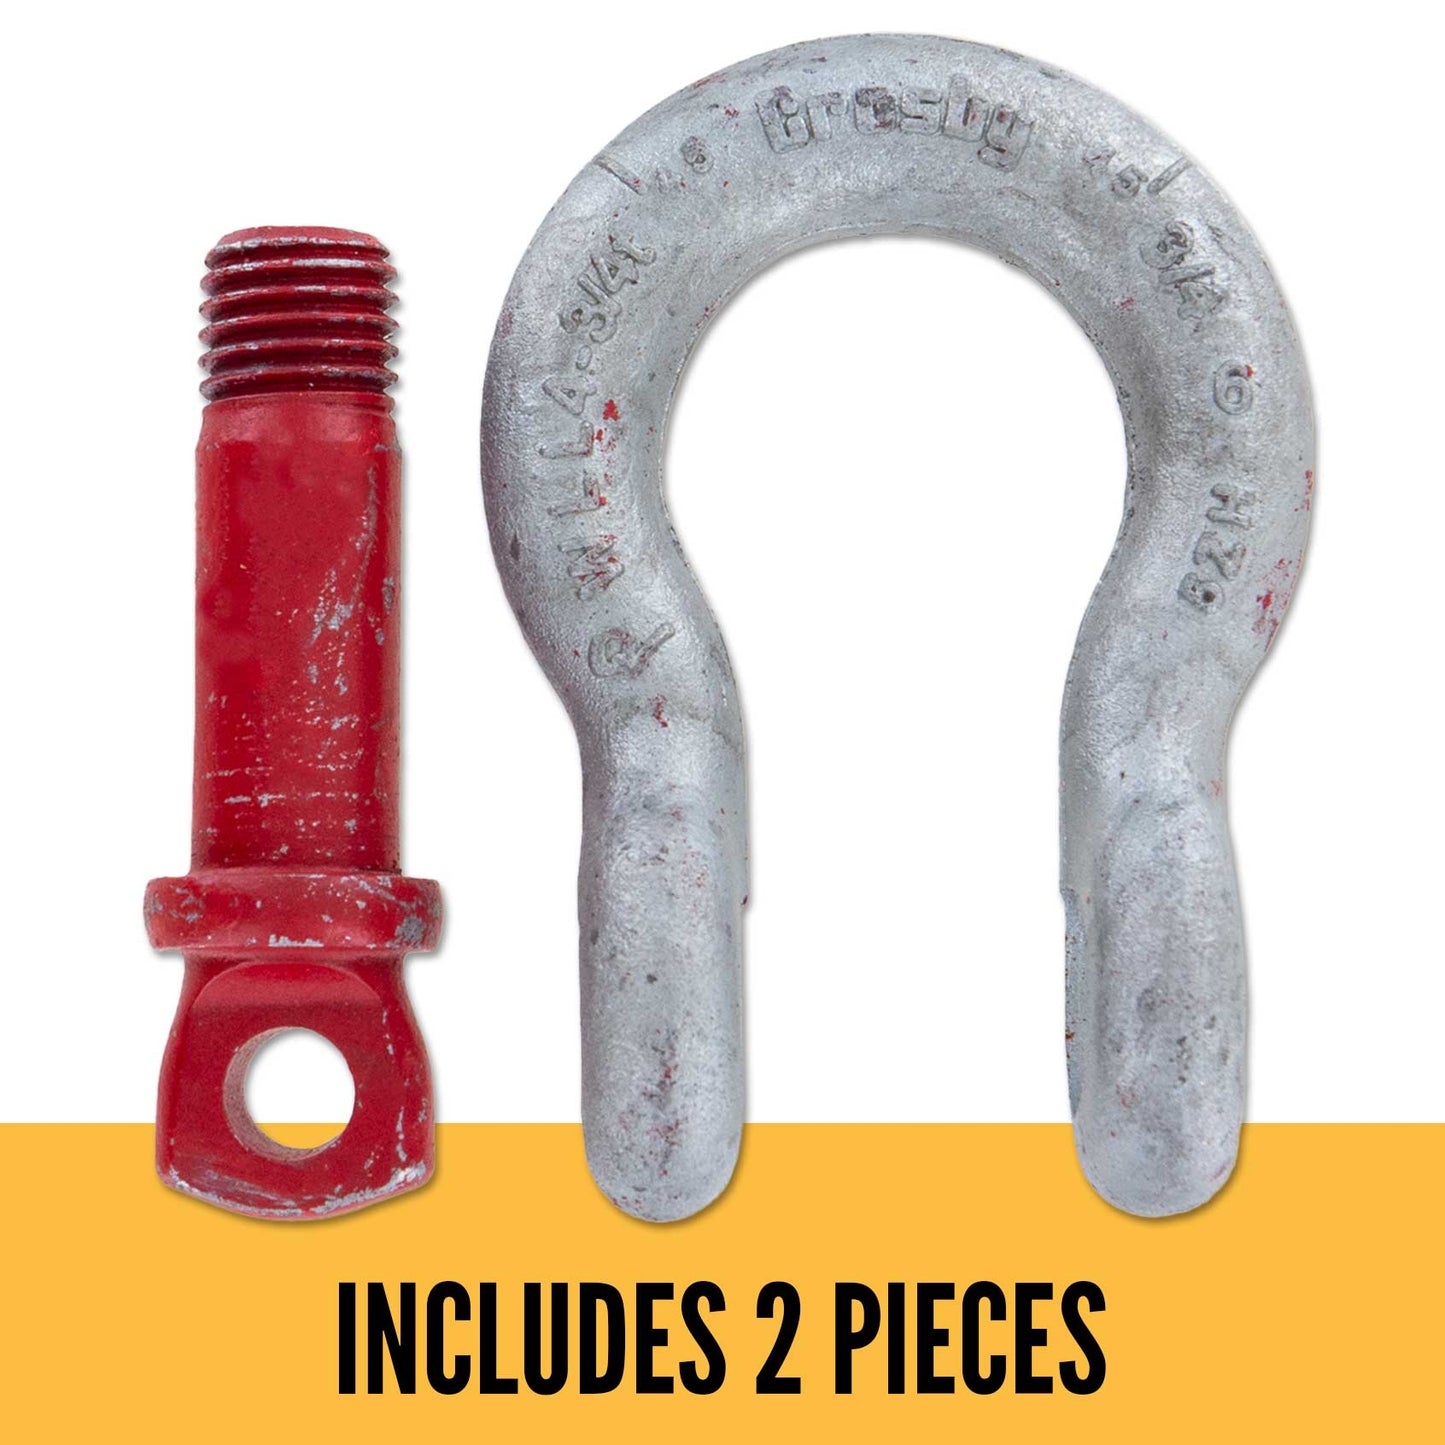 Crosby 7/8 Galvanized Screw Pin Anchor Shackles USA WLL 6-1/2 Tons #1018516